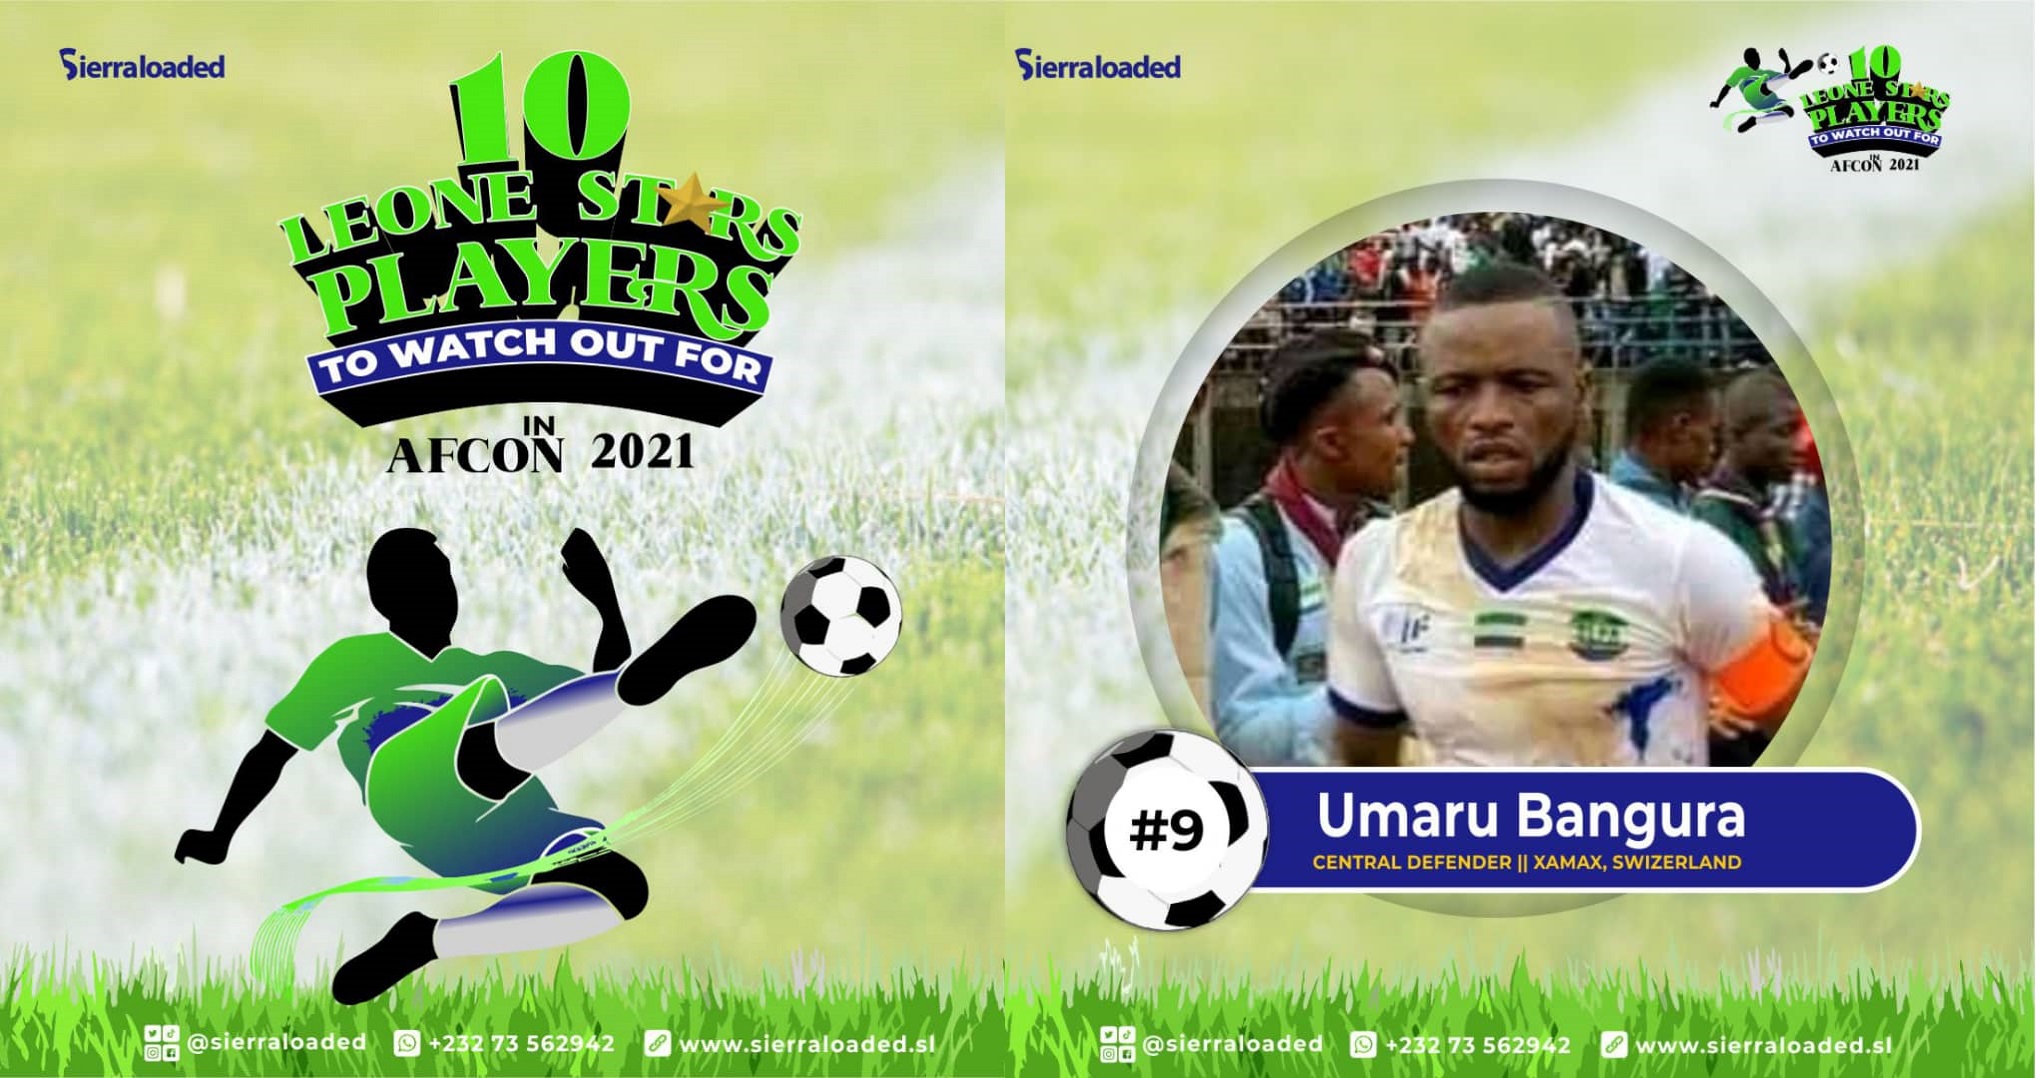 10 Leone Stars Players to Watch Out For in AFCON 2021: Umaru Bangura – #9